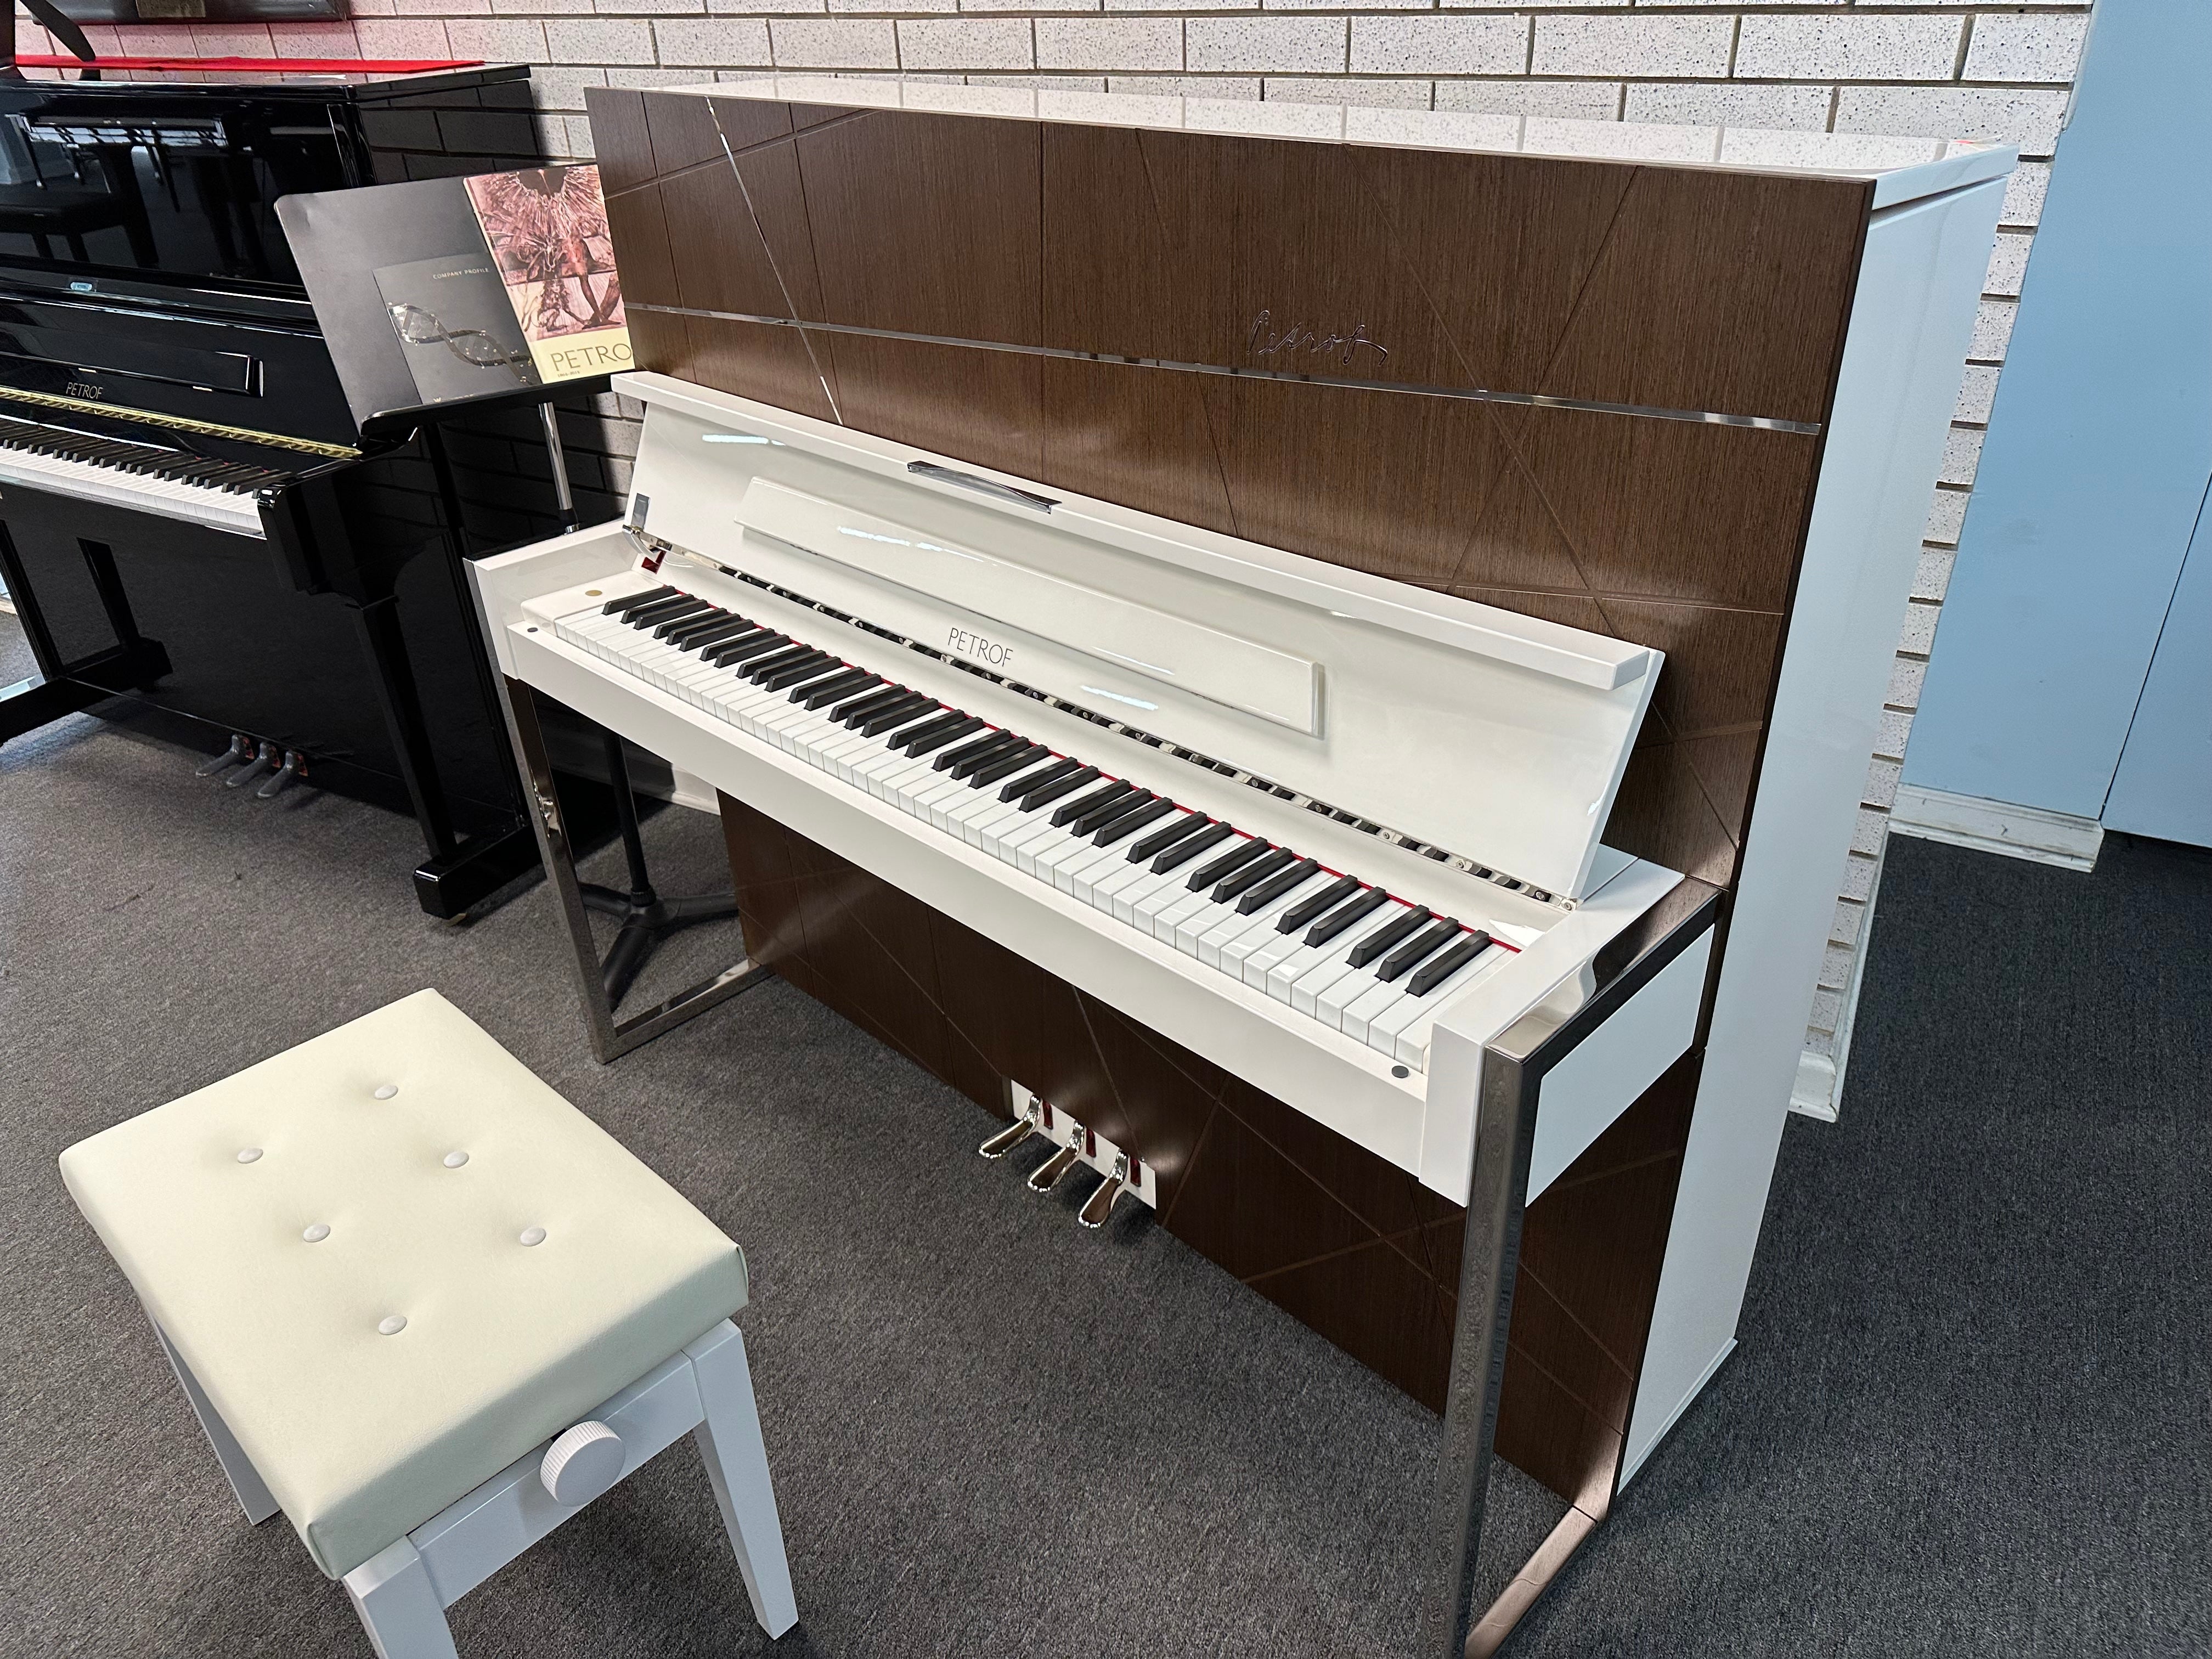 Petrof NEXT P127 (50") Upright Piano in White Polish with Wood Satin Wood Tones